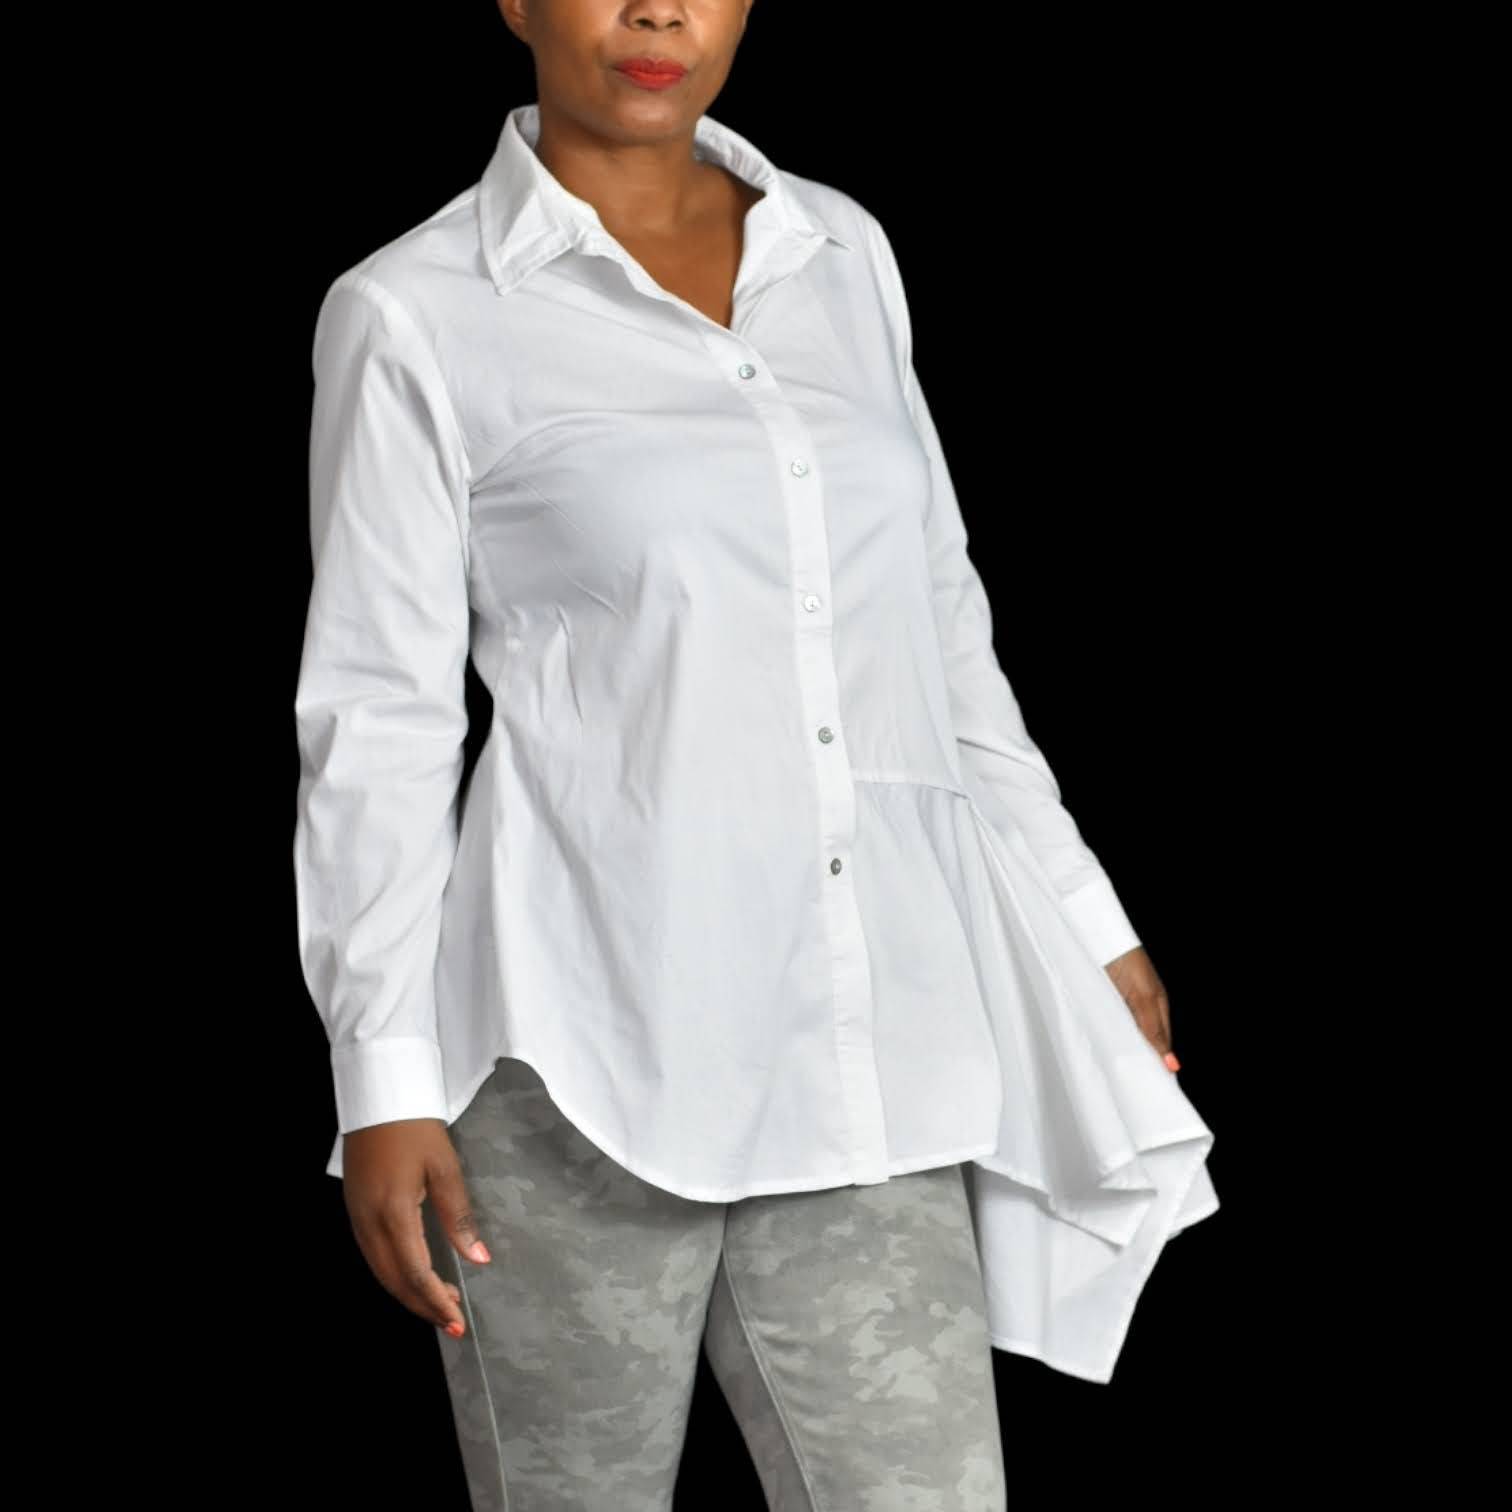 Comfy USA Asymmetrical White Shirt Lagenlook Button Front Draped Size Small